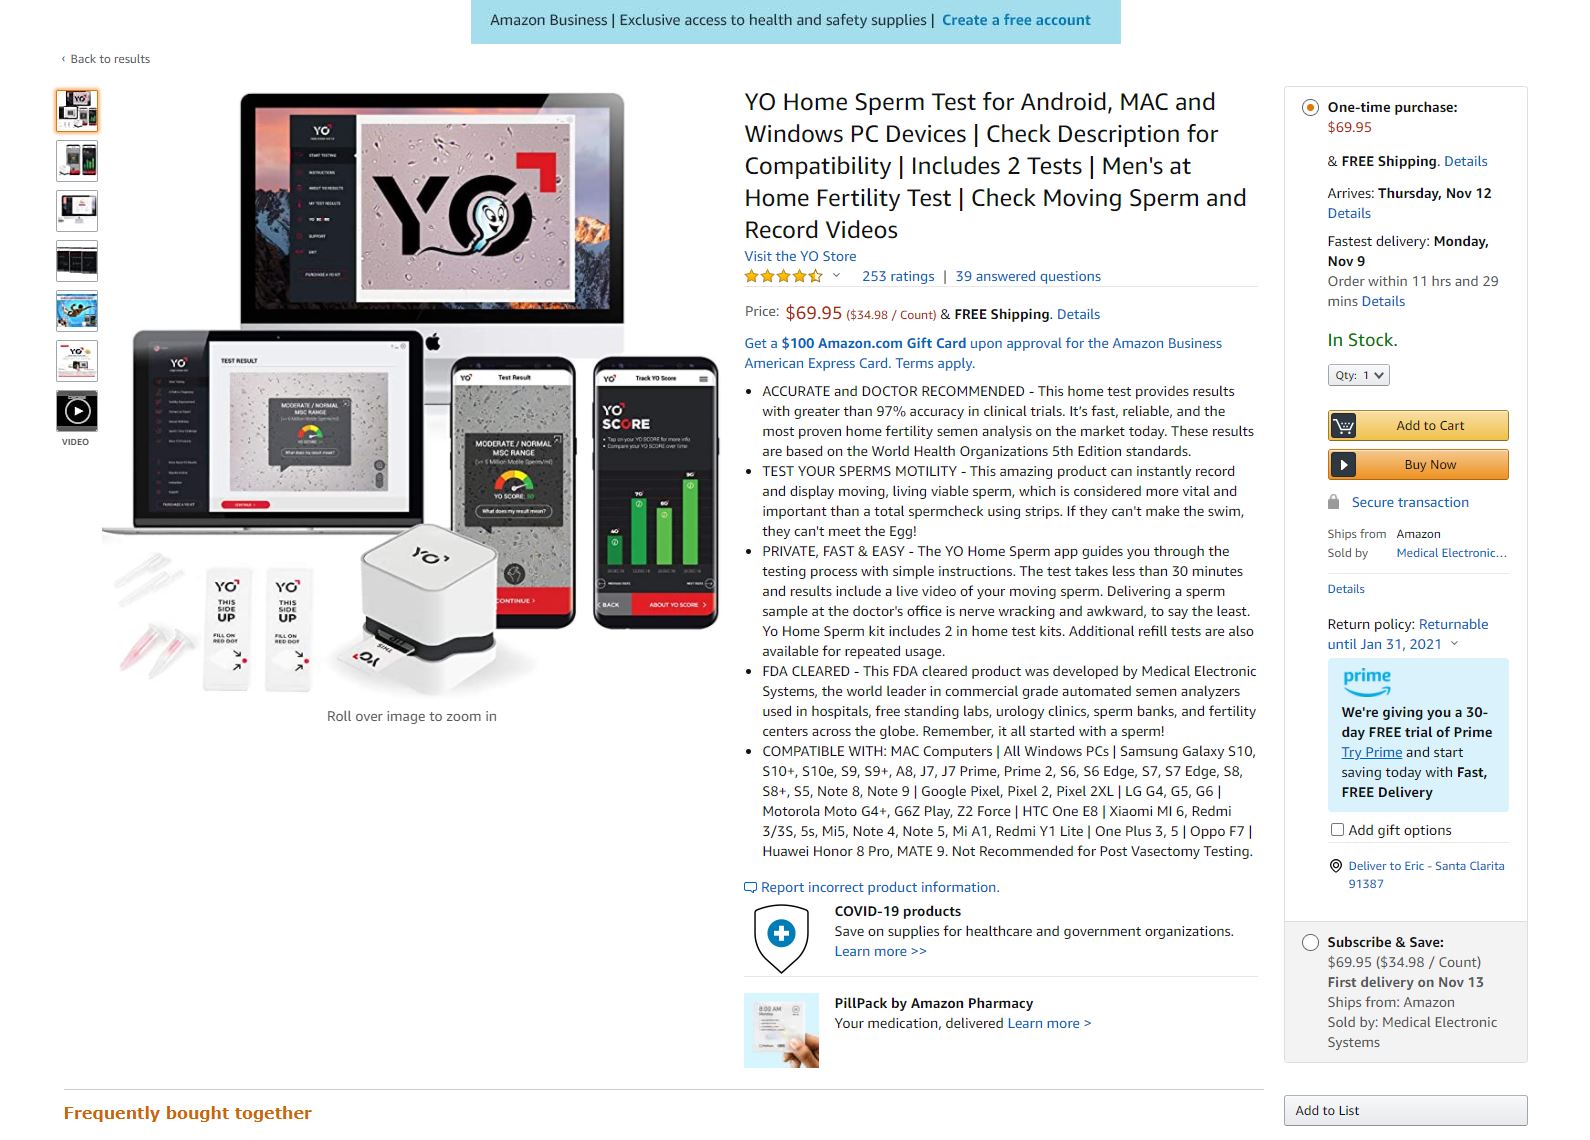 YO Home Sperm Test Available on Amazon